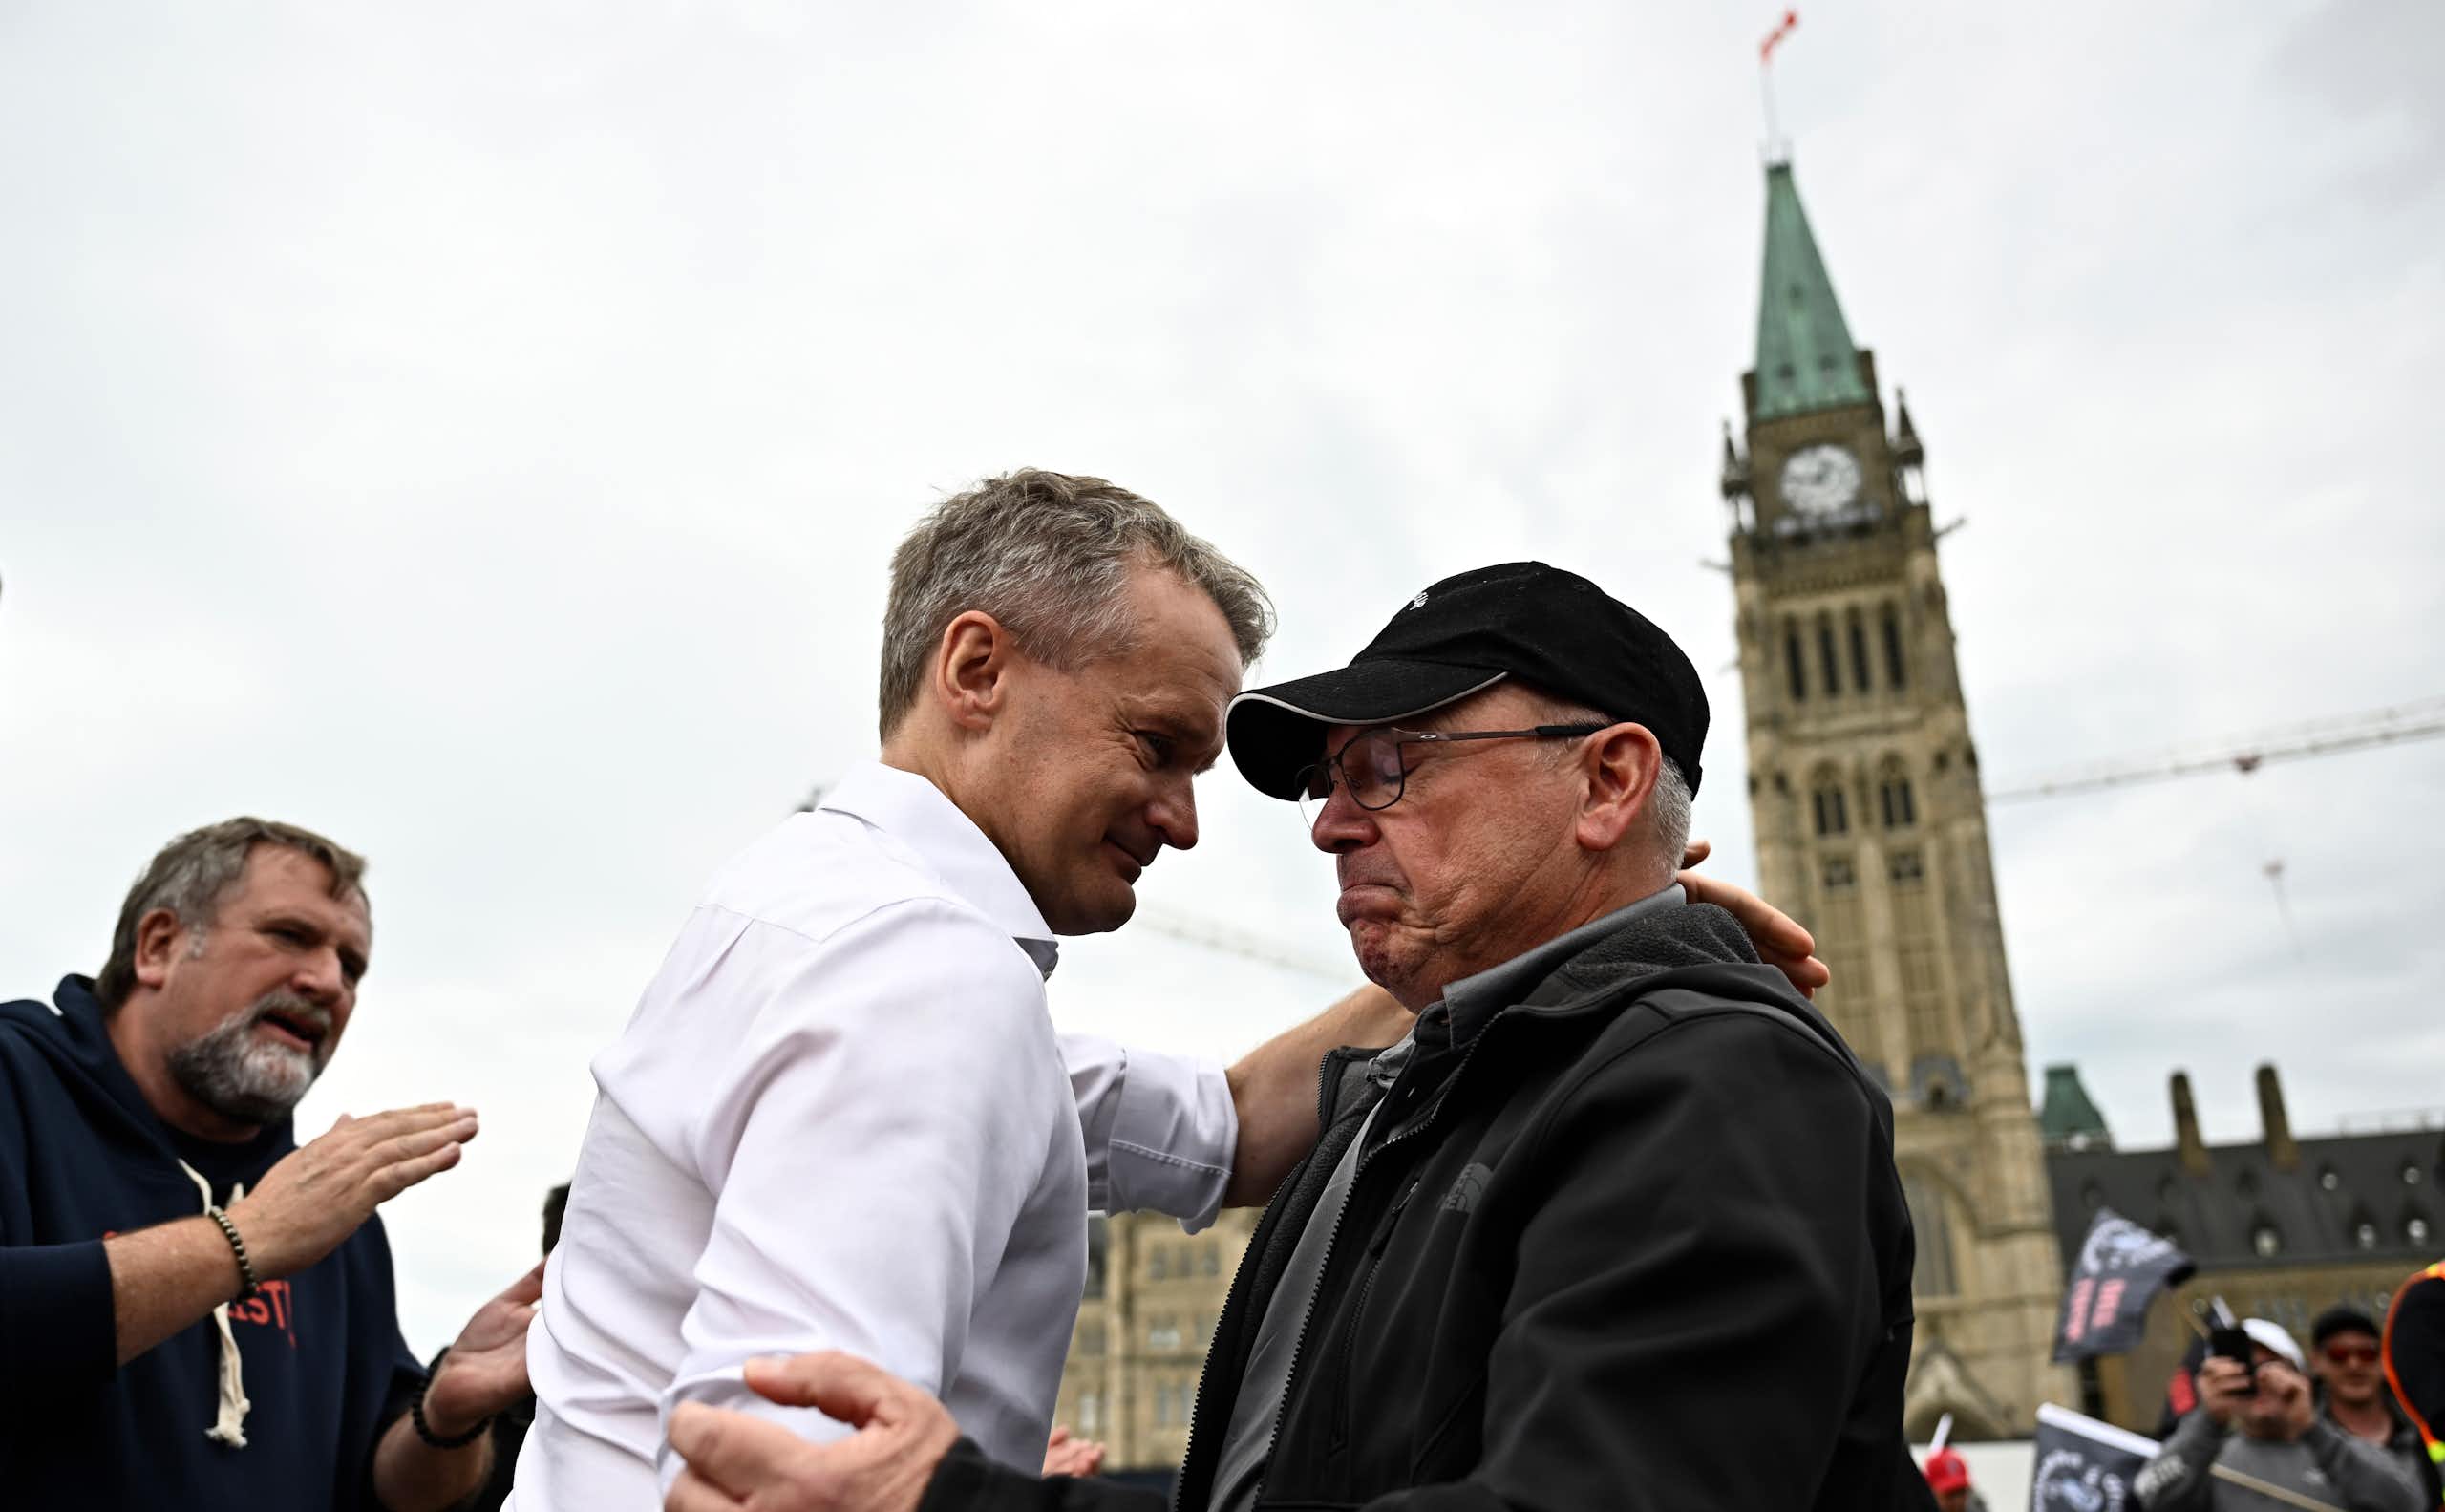 A man in a white shirt and tie embraces an older man in a ball cap with the Peace Tower behind them.